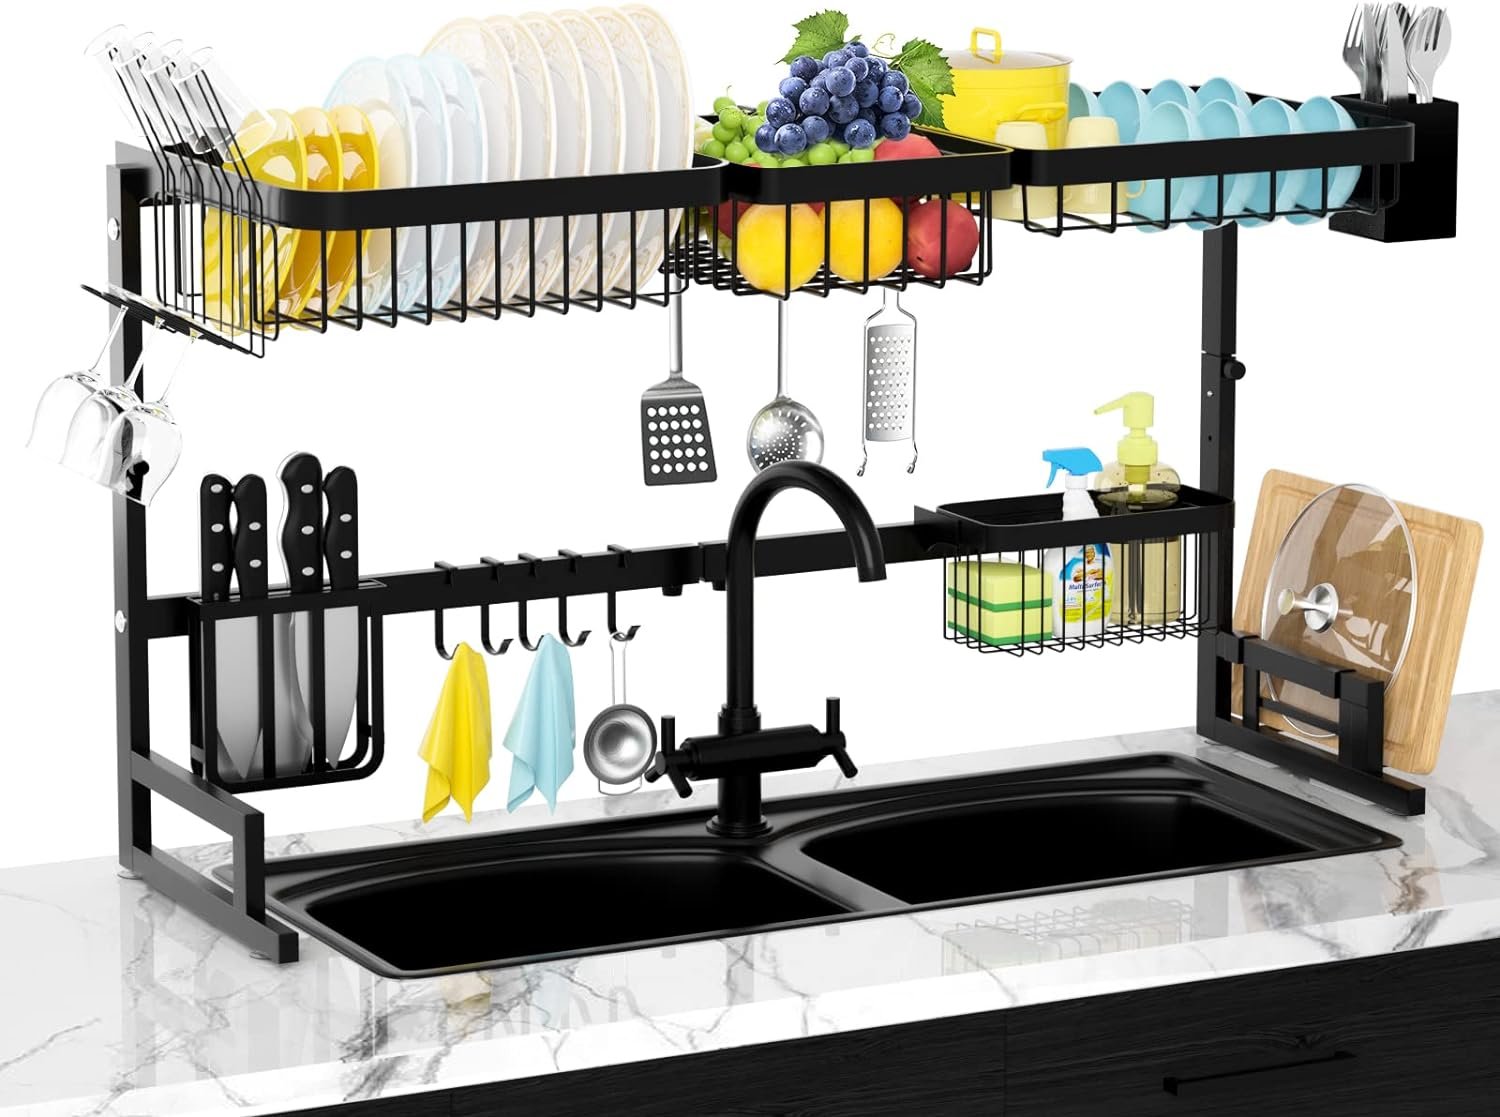 MERRYBOX Over The Sink Dish Drying Rack (33.4-41.3) Large Upgraded 2 Tier Length  Height Adjustable Stainless Steel Dishes Drainer for Kitchen Counter Space Saving Storage Organizer, Black